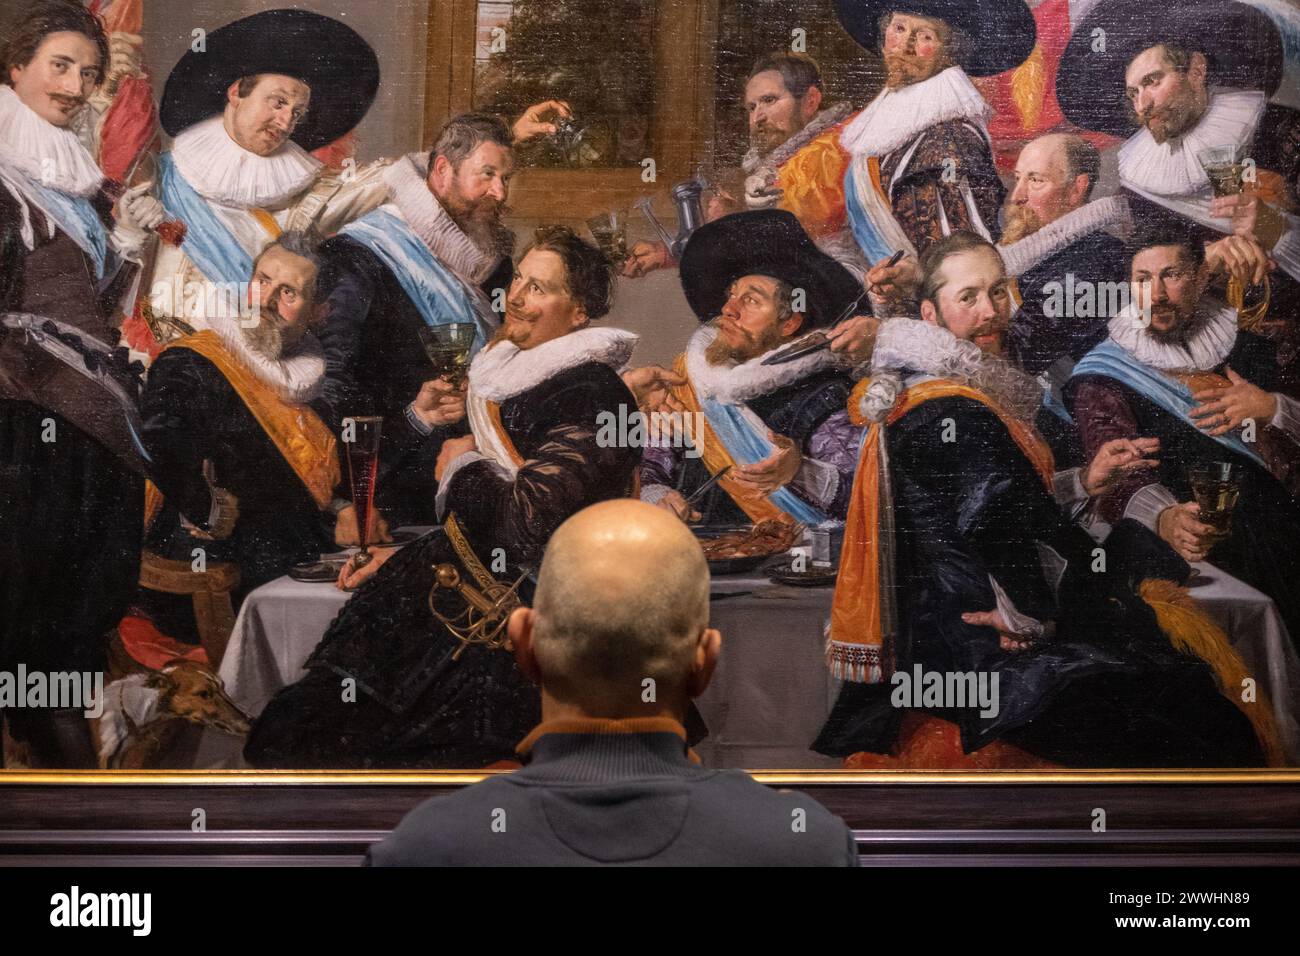 visitor looking at 'Banquet of the Callivrmen Civic Guard' by dutch painter Frans Hals Stock Photo